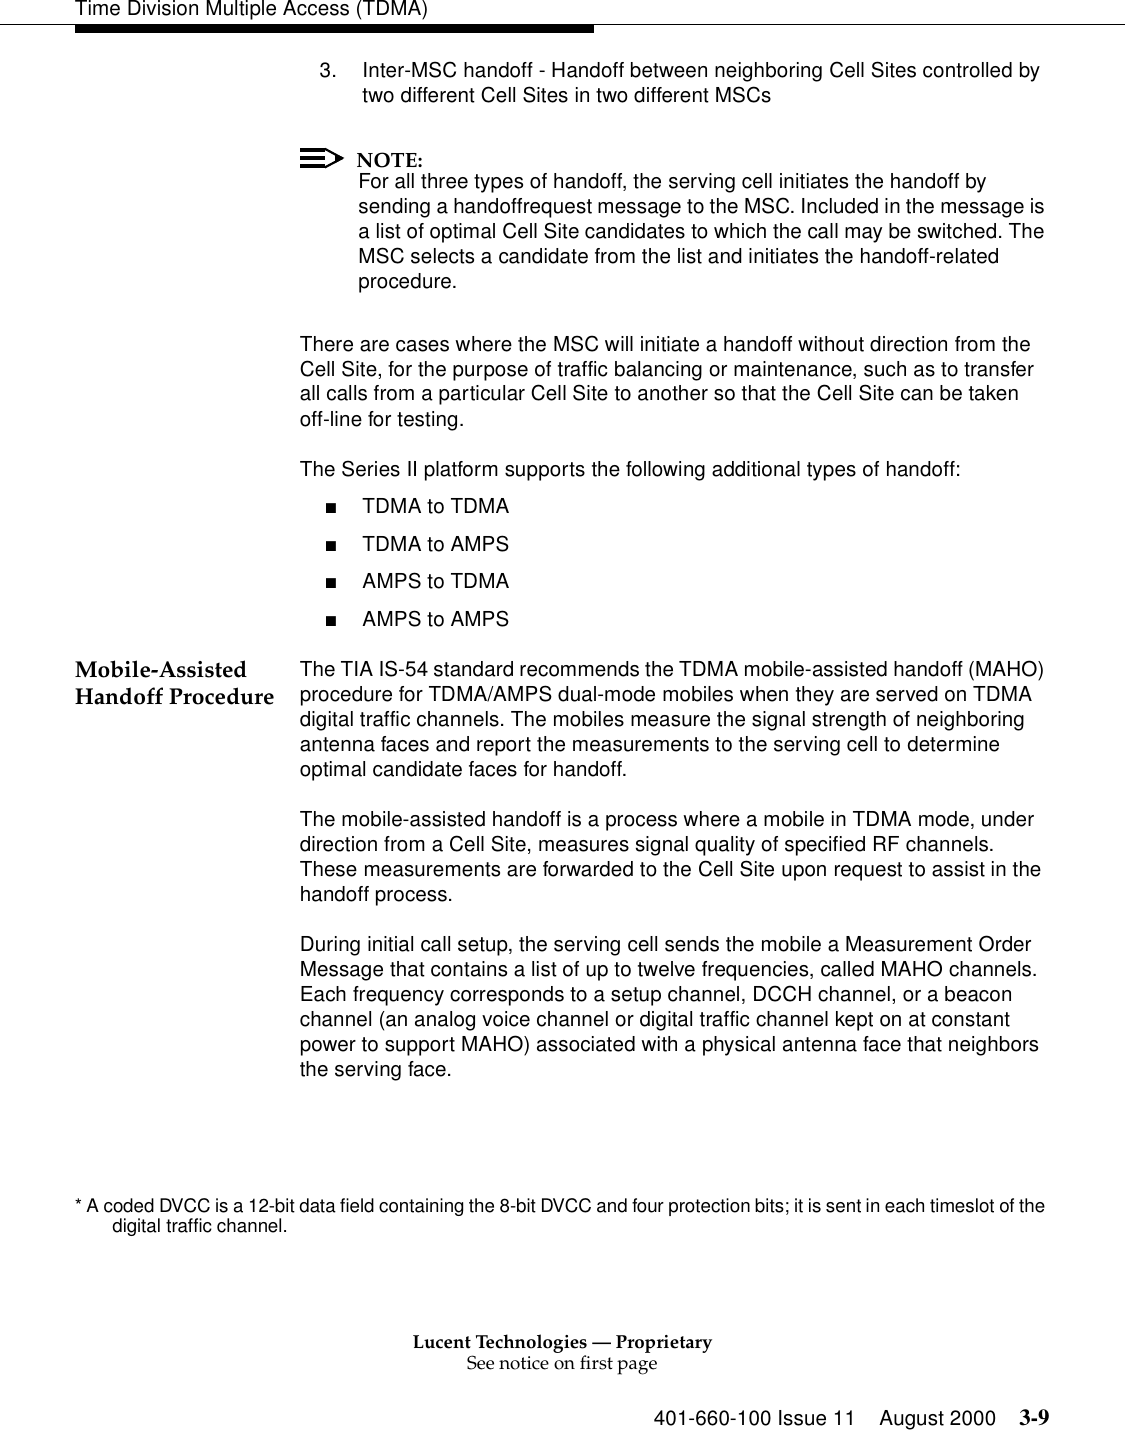 Lucent Technologies — ProprietarySee notice on first page401-660-100 Issue 11 August 2000 3-9Time Division Multiple Access (TDMA)3. Inter-MSC handoff - Handoff between neighboring Cell Sites controlled by two different Cell Sites in two different MSCsNOTE:For all three types of handoff, the serving cell initiates the handoff by sending a handoffrequest message to the MSC. Included in the message is a list of optimal Cell Site candidates to which the call may be switched. The MSC selects a candidate from the list and initiates the handoff-related procedure. There are cases where the MSC will initiate a handoff without direction from the Cell Site, for the purpose of traffic balancing or maintenance, such as to transfer all calls from a particular Cell Site to another so that the Cell Site can be taken off-line for testing. The Series II platform supports the following additional types of handoff: ■TDMA to TDMA ■TDMA to AMPS ■AMPS to TDMA ■AMPS to AMPSMobile-Assisted Handoff Procedure The TIA IS-54 standard recommends the TDMA mobile-assisted handoff (MAHO) procedure for TDMA/AMPS dual-mode mobiles when they are served on TDMA digital traffic channels. The mobiles measure the signal strength of neighboring antenna faces and report the measurements to the serving cell to determine optimal candidate faces for handoff.The mobile-assisted handoff is a process where a mobile in TDMA mode, under direction from a Cell Site, measures signal quality of specified RF channels. These measurements are forwarded to the Cell Site upon request to assist in the handoff process.During initial call setup, the serving cell sends the mobile a Measurement Order Message that contains a list of up to twelve frequencies, called MAHO channels. Each frequency corresponds to a setup channel, DCCH channel, or a beacon channel (an analog voice channel or digital traffic channel kept on at constant power to support MAHO) associated with a physical antenna face that neighbors the serving face. * A coded DVCC is a 12-bit data field containing the 8-bit DVCC and four protection bits; it is sent in each timeslot of the digital traffic channel. 